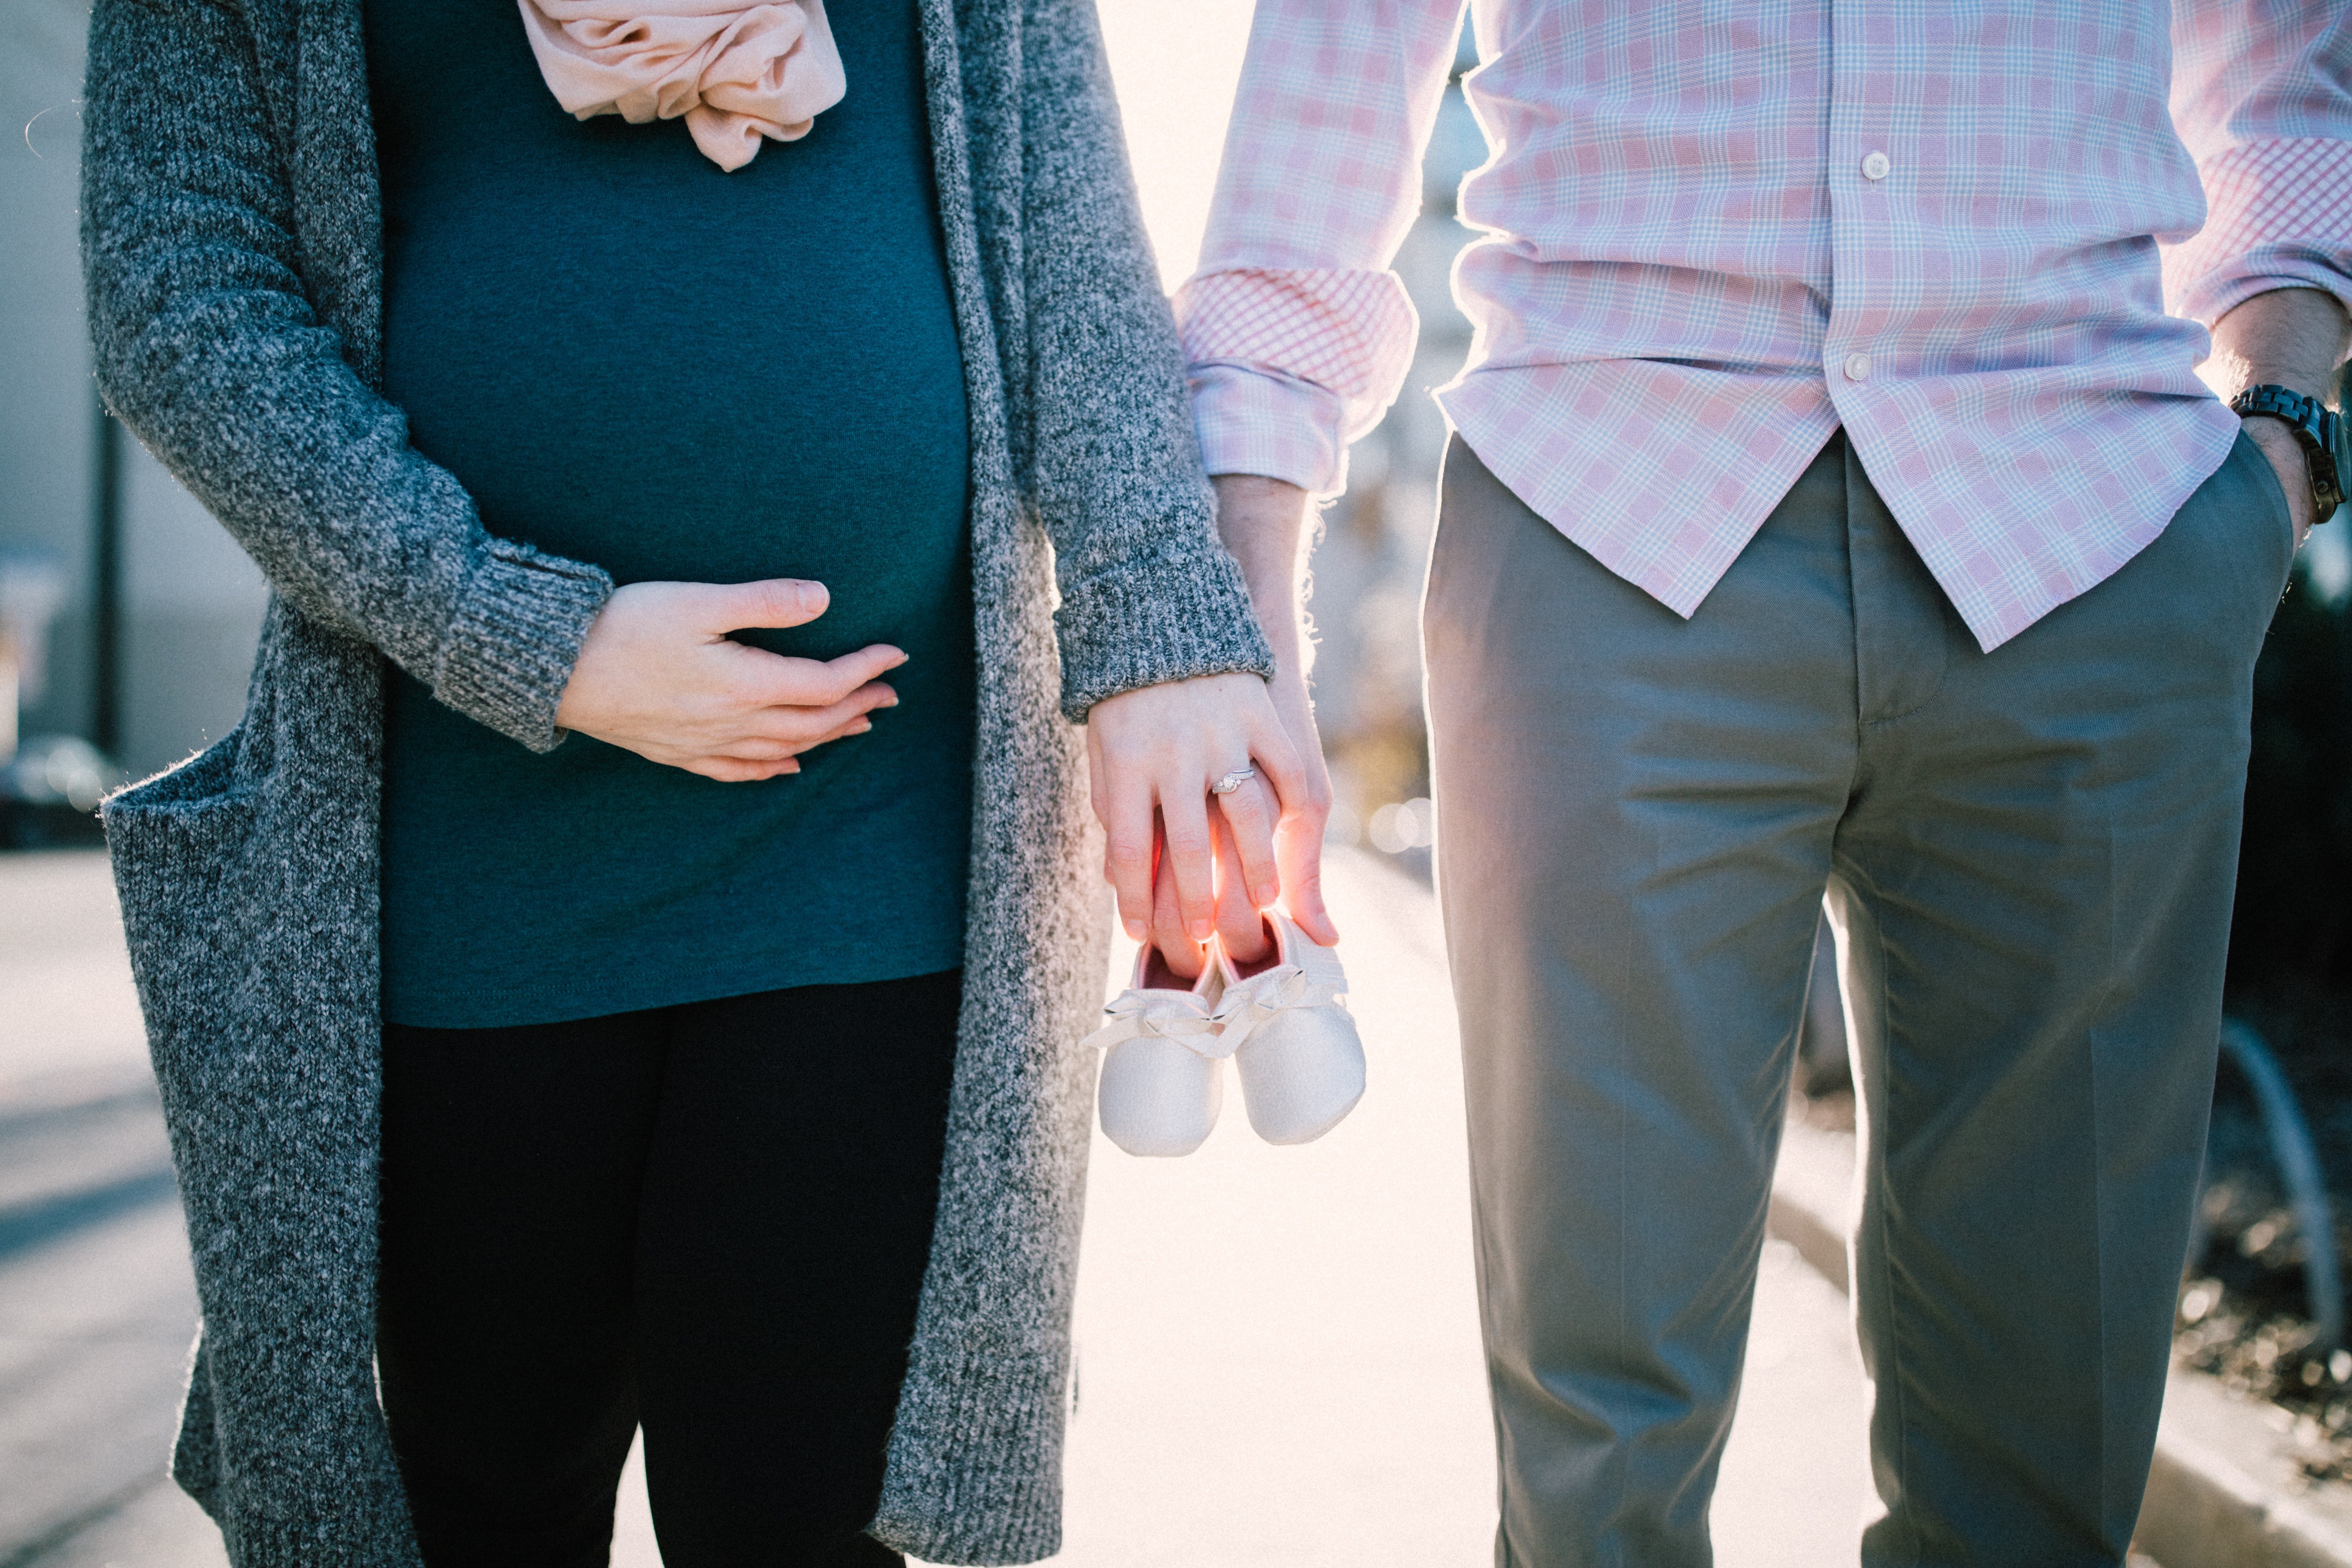 OP said he would help his pregnant wife to the best of his ability | Photo: Unsplash